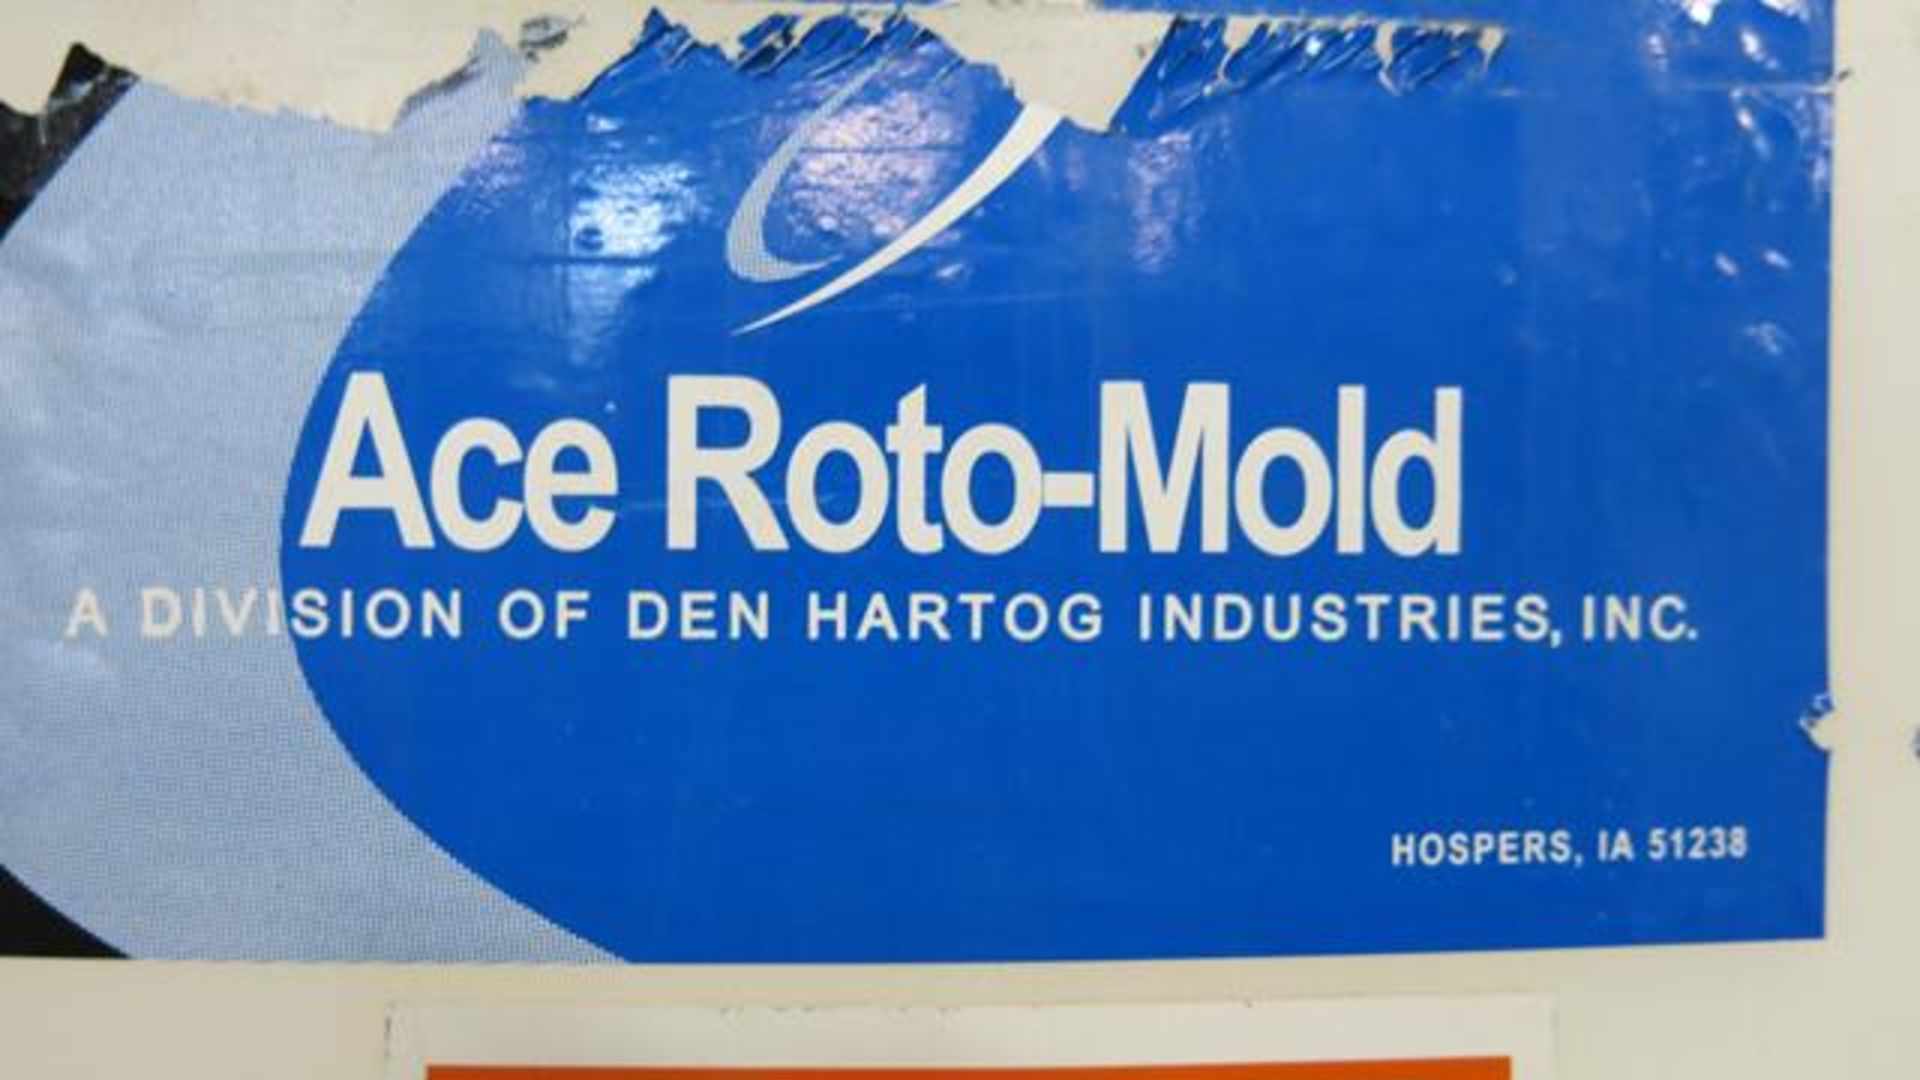 ACE ROTO-MOLD, 1,490 GALLON, CONE BOTTOM, PLASTIC TANK WITH 64", STEEL STAND, 2" OUTLET FLANGE - Image 2 of 2